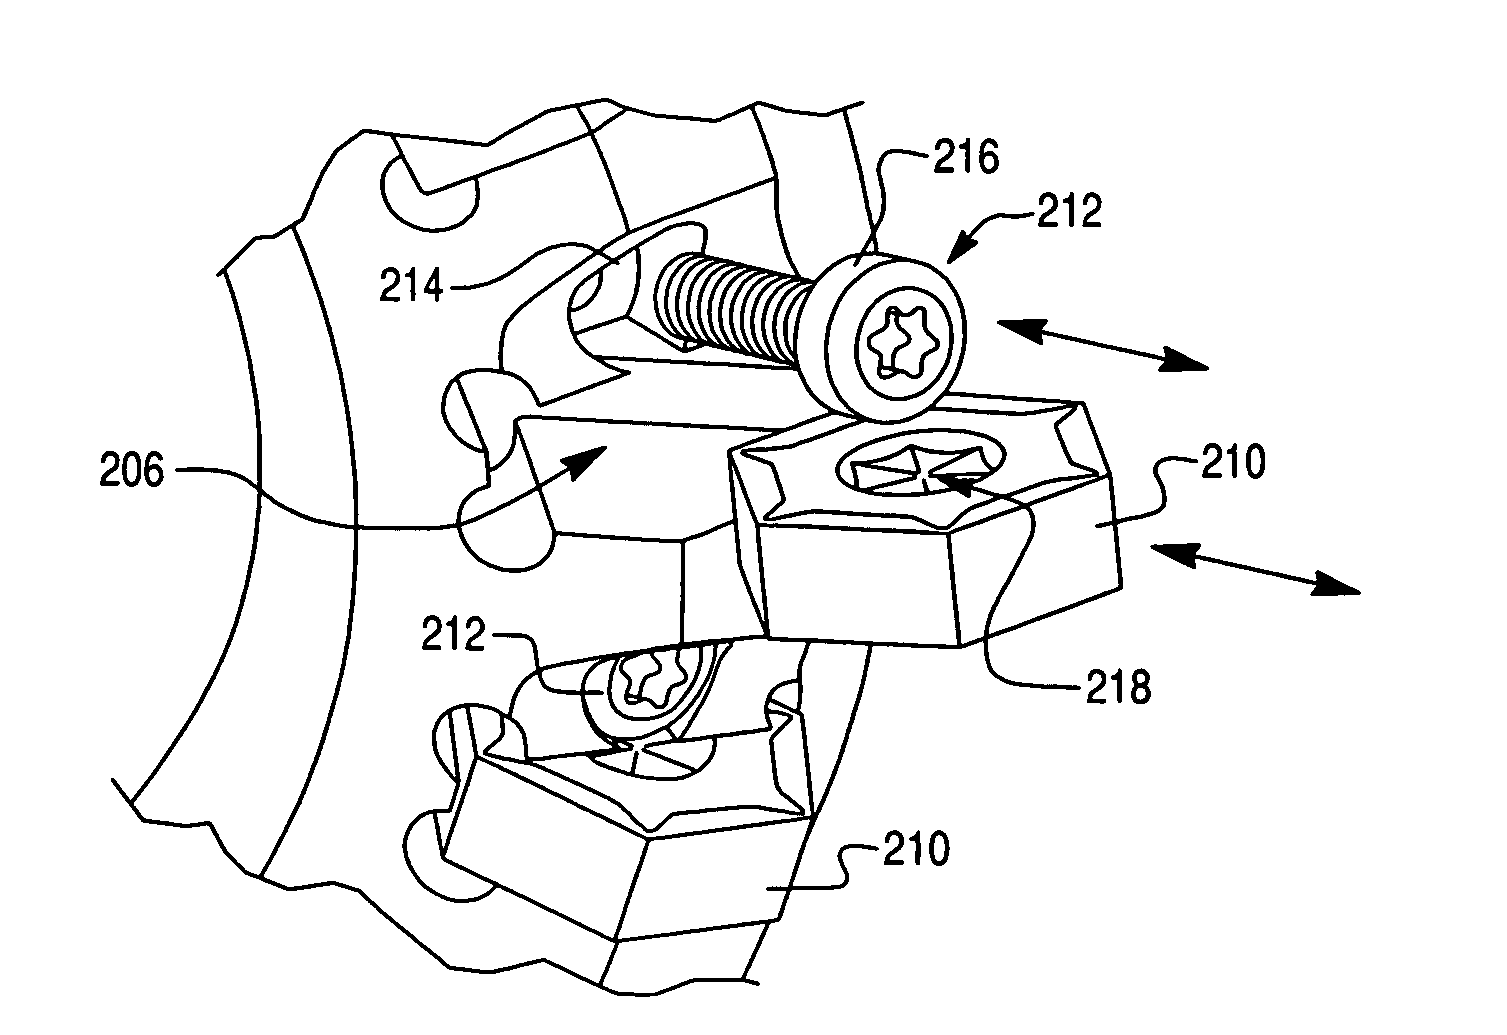 Side locking insert and material removal tool with same